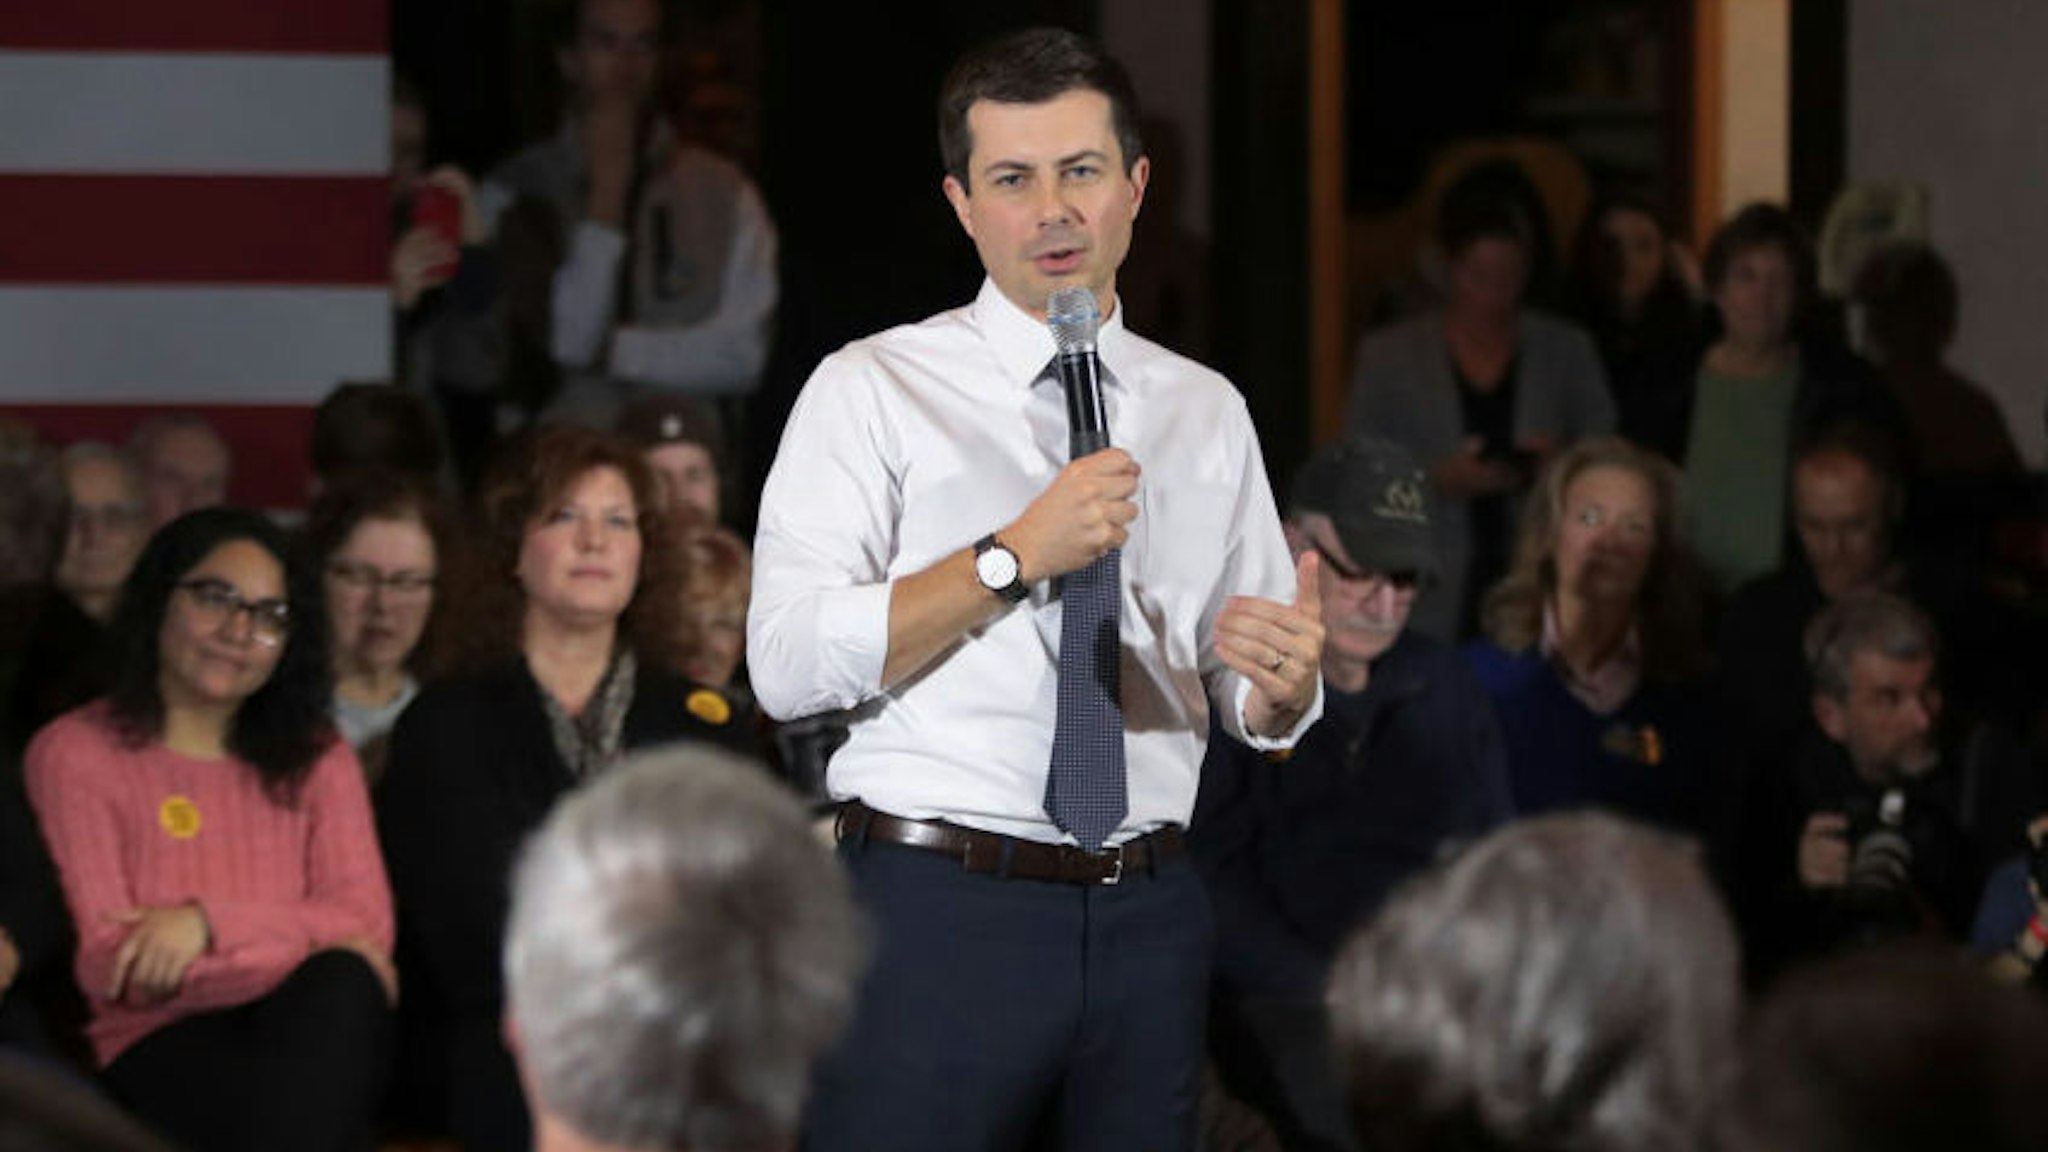 DENISON, IOWA - NOVEMBER 26: Democratic presidential candidate South Bend, Indiana Mayor Pete Buttigieg speaks to guests during a campaign stop at Cronk's restaurant on November 26, 2019 in Denison, Iowa. The 2020 Iowa Democratic caucuses will take place on February 3, 2020, making it the first nominating contest for the Democratic Party in choosing their presidential candidate to face Donald Trump in the 2020 election